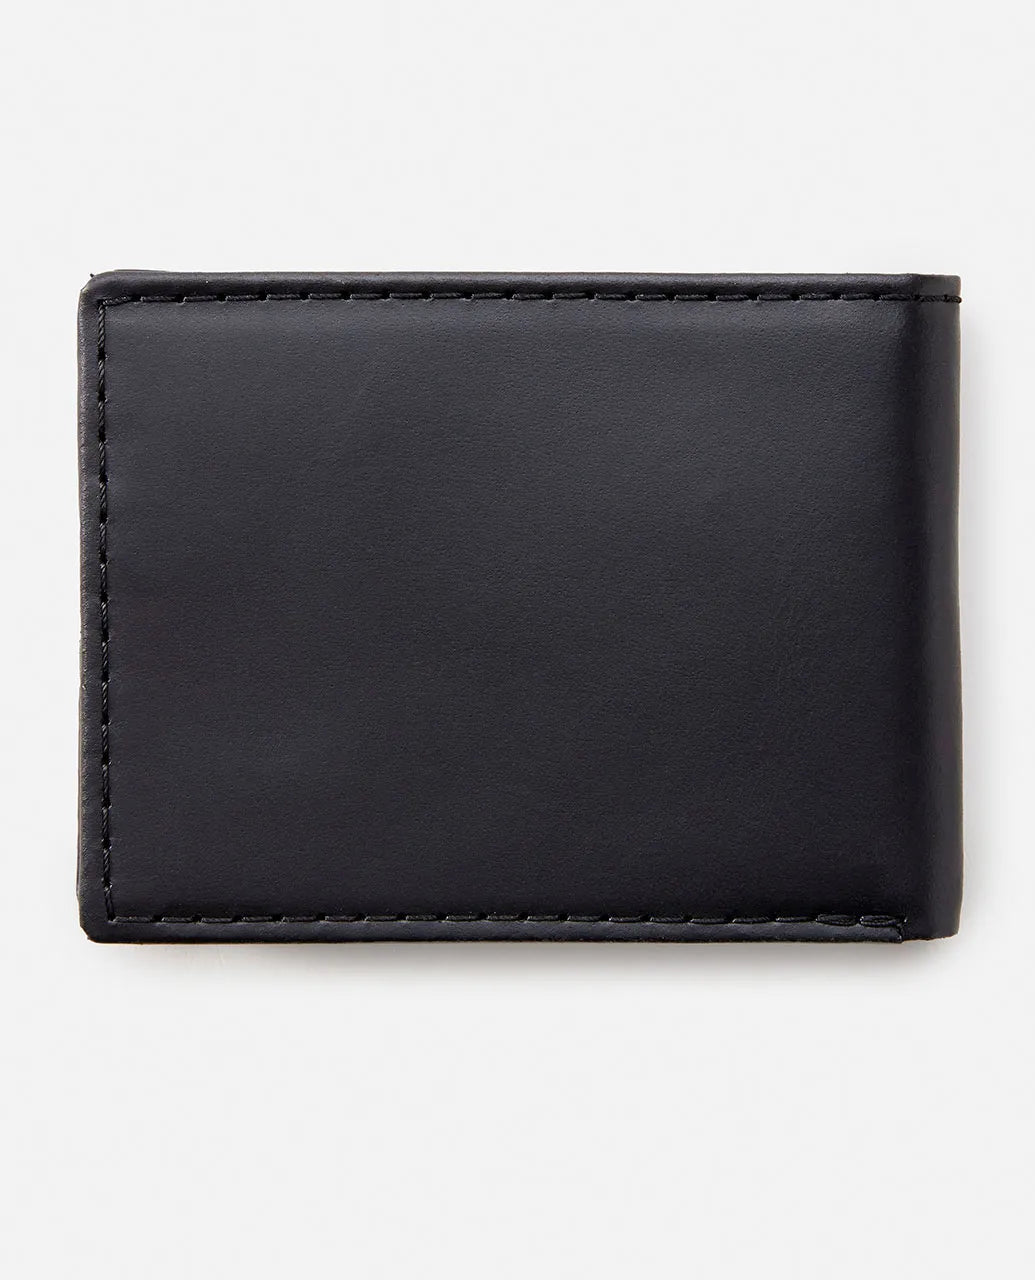 RIP CURL EXECUFOLD RFID ALL DAY WALLET BLACK